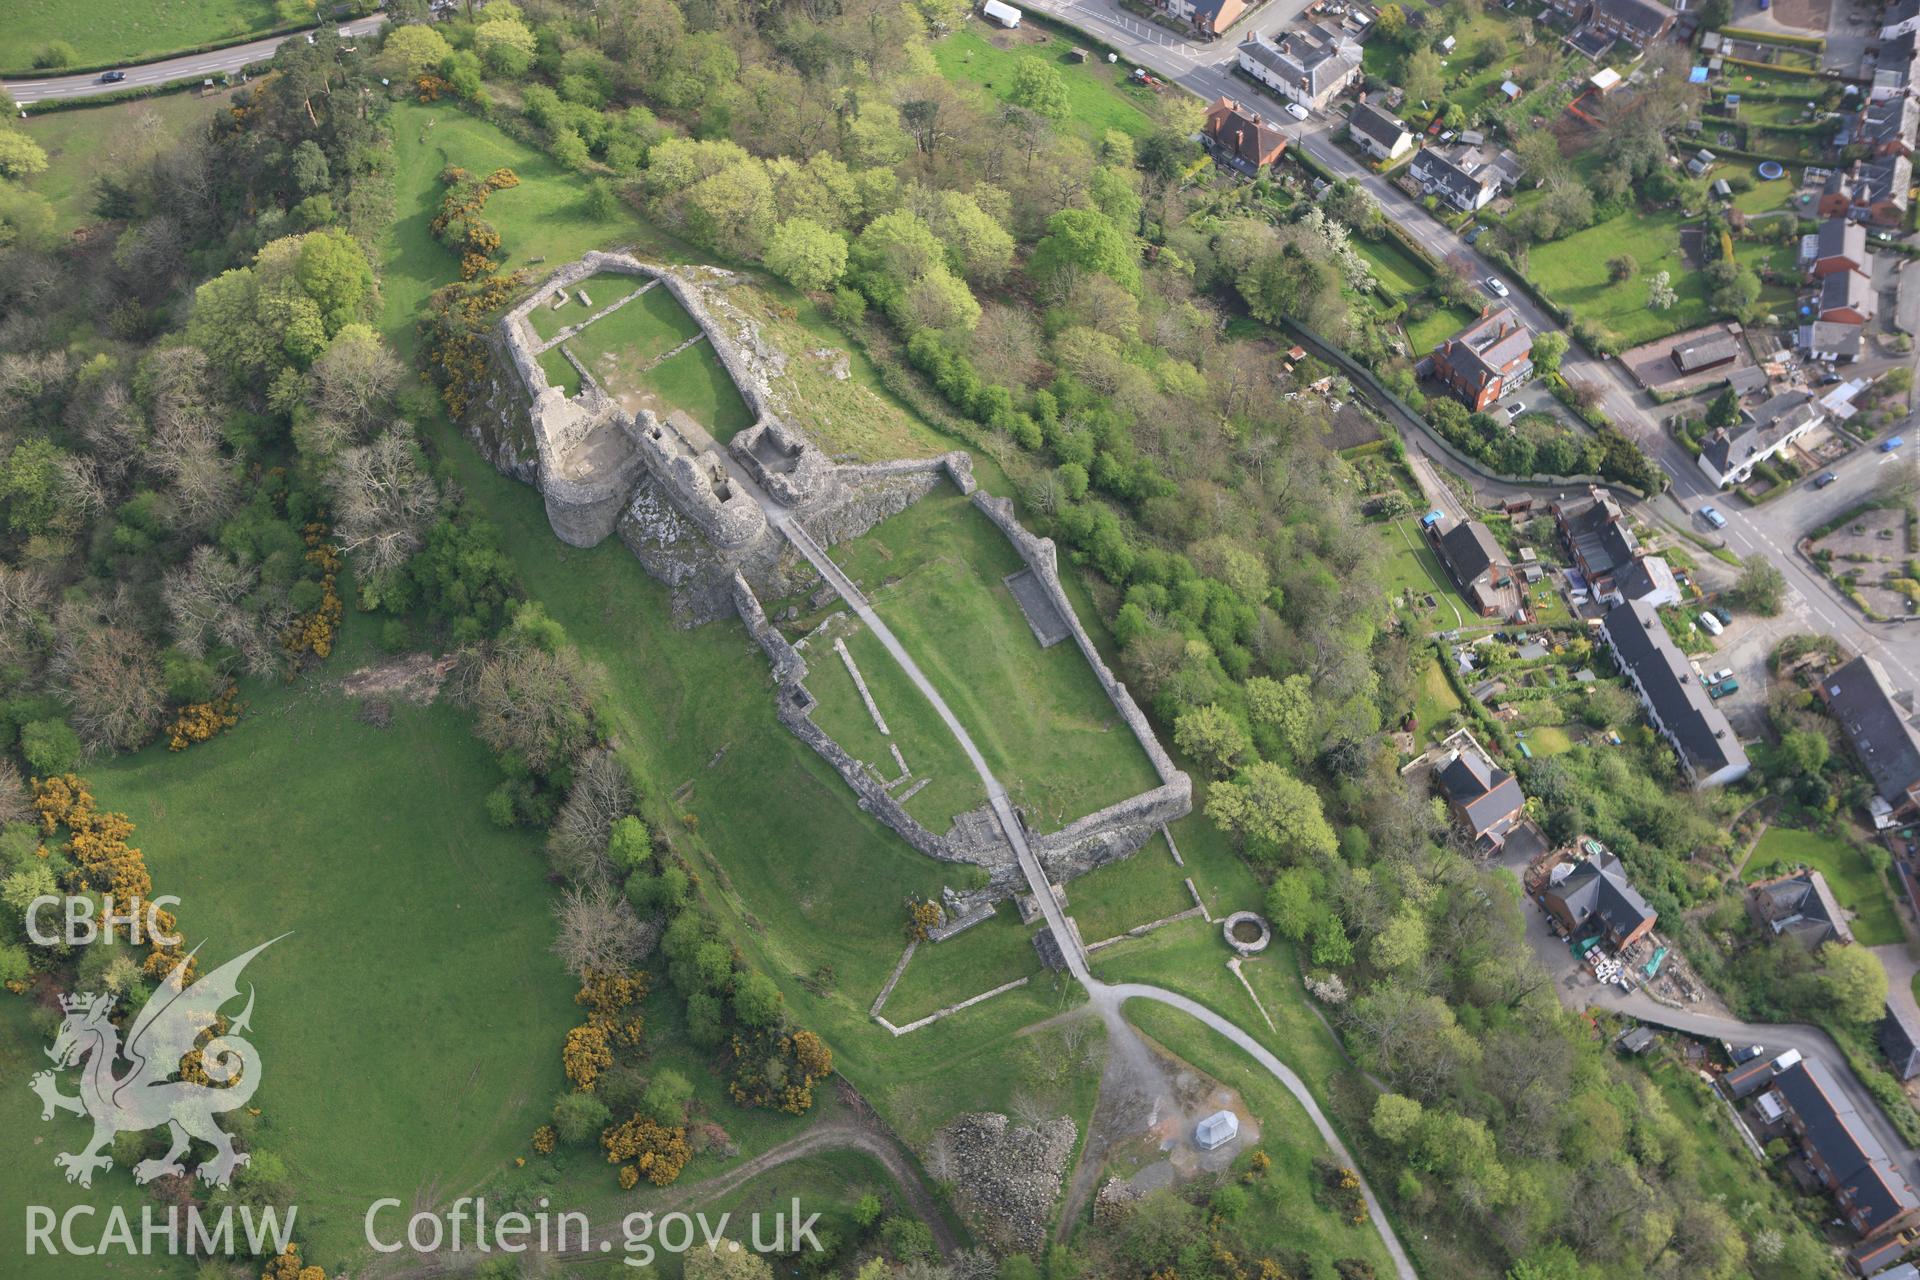 RCAHMW colour oblique aerial photograph of Montgomery Castle. Taken on 21 April 2009 by Toby Driver